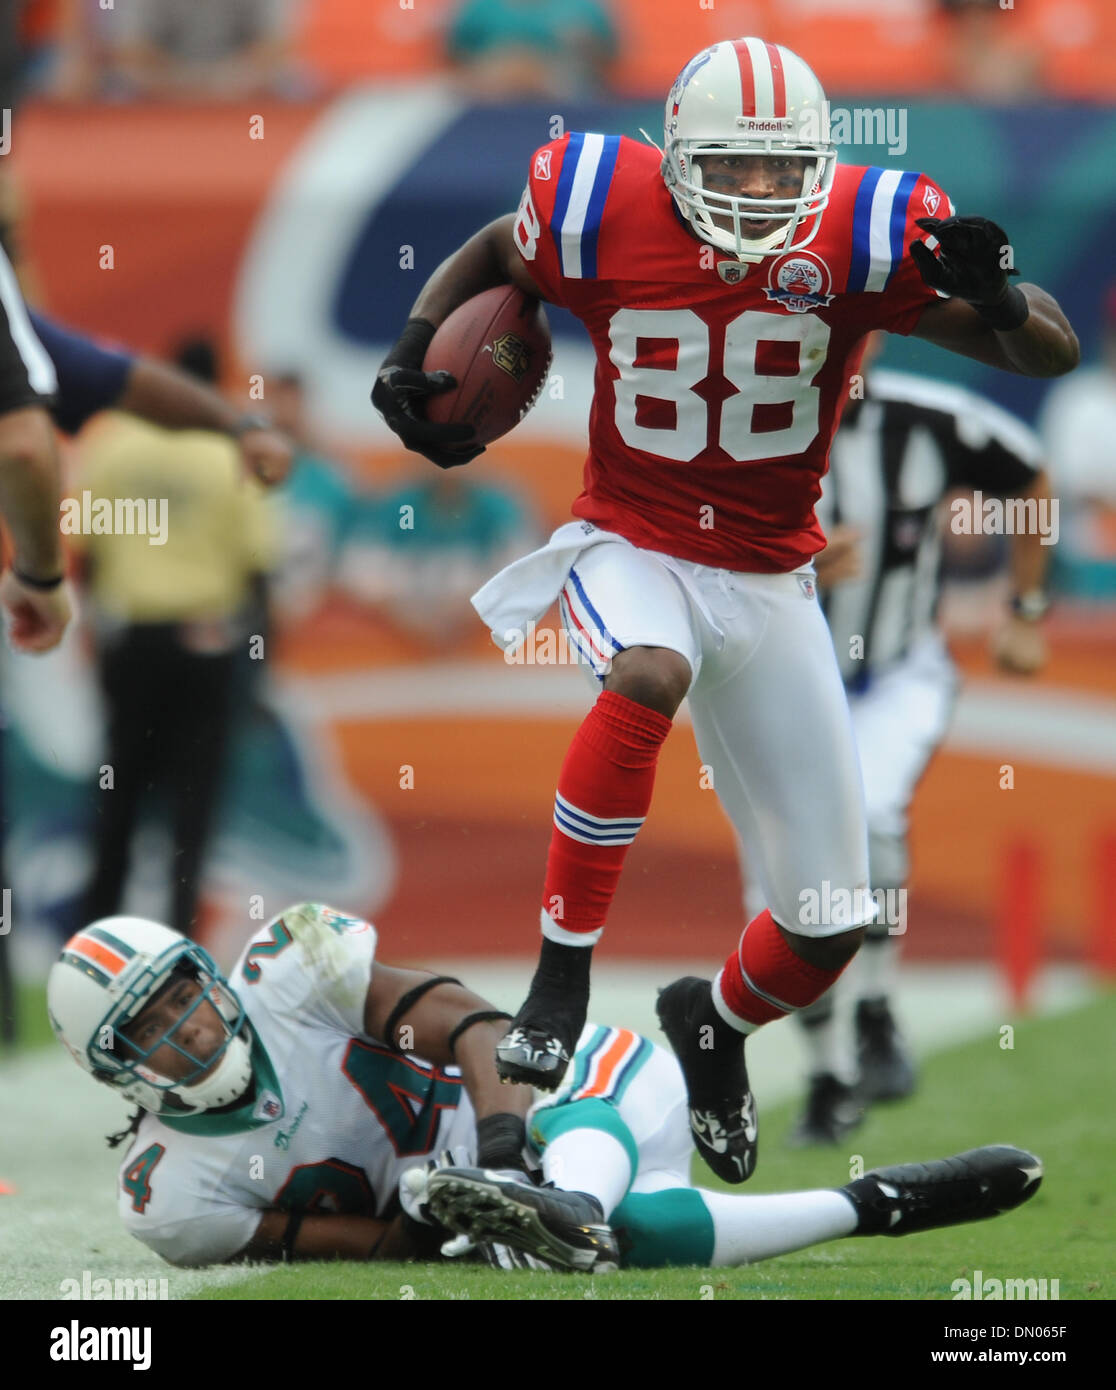 Dec. 06, 2009 - Miami Gardens, Florida, USA - Dolphins-pats-JR120609. Sam Aiken of the Patriots breaks free from the tackle of Sean Smith and runs for an 81 yard touchdown in the third quarter. 12/6/09. Sun Sentinel, Jim Rassol  (Credit Image: © Sun-Sentinel/ZUMApress.com) Stock Photo